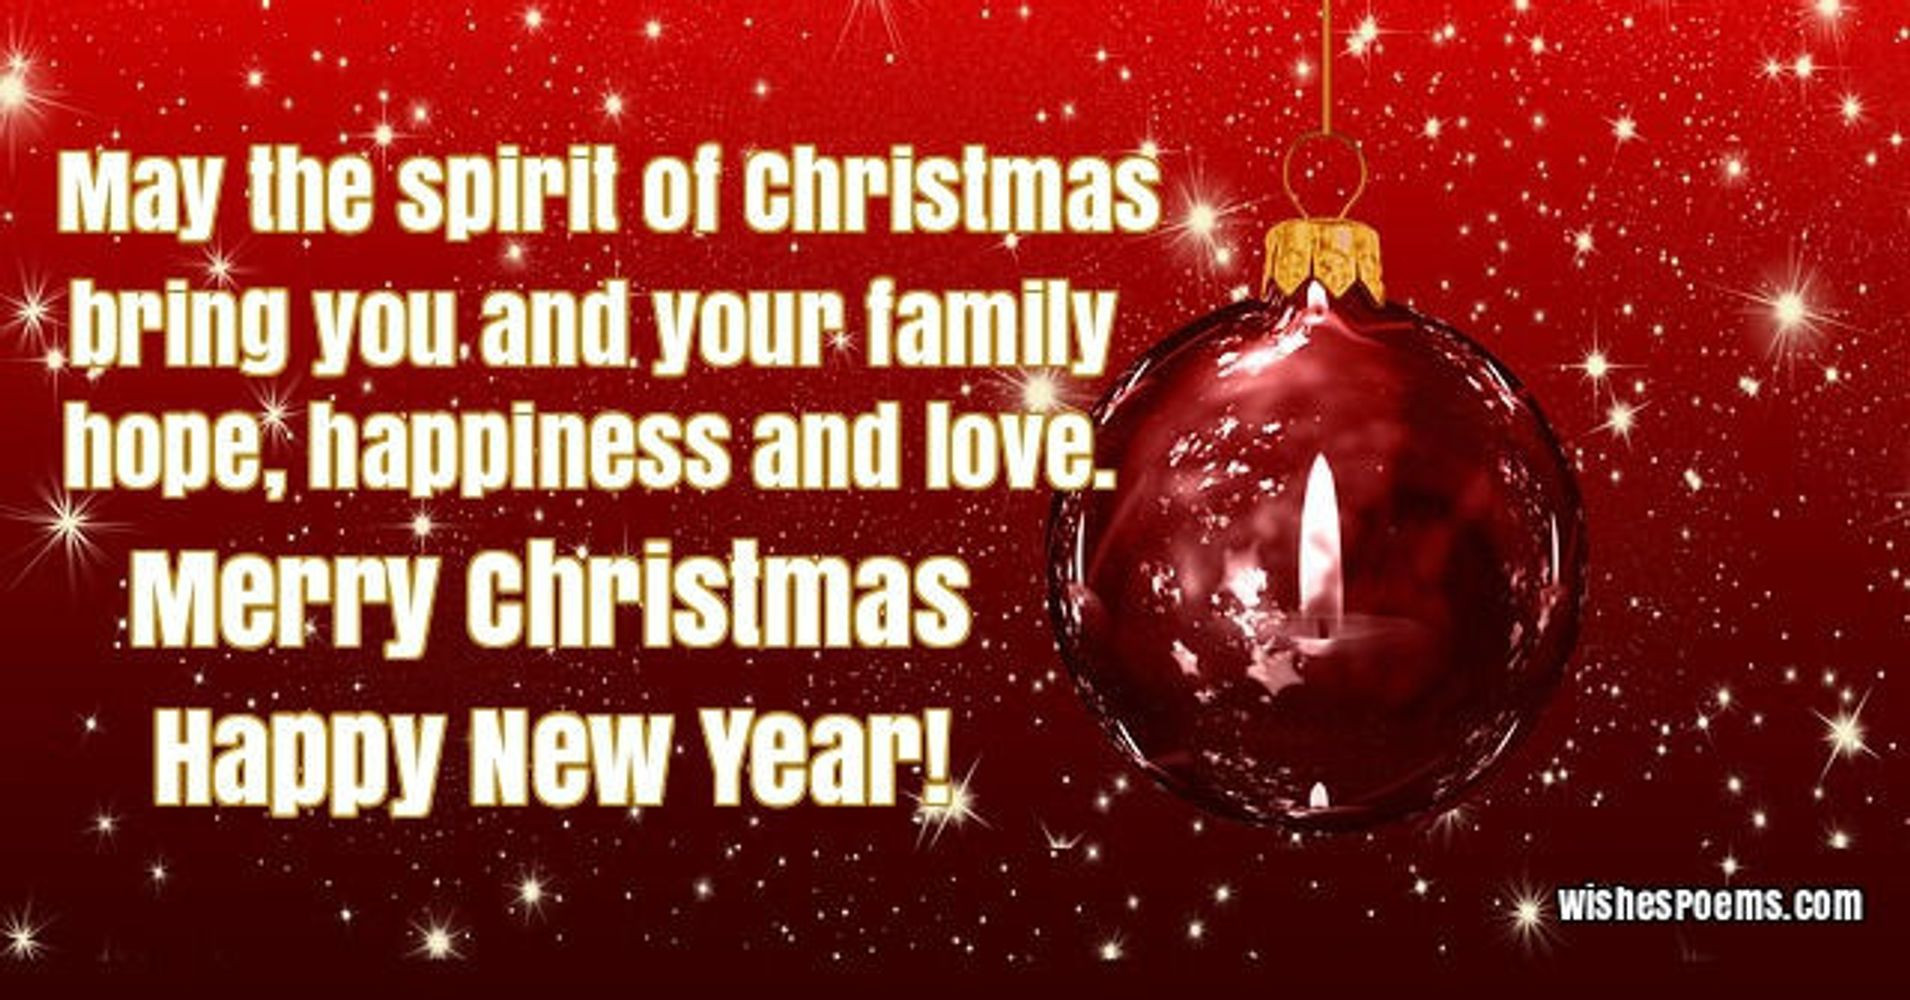 Merry Christmas Quotes And Images
 35 Christmas Card Messages What to Write in a Christmas